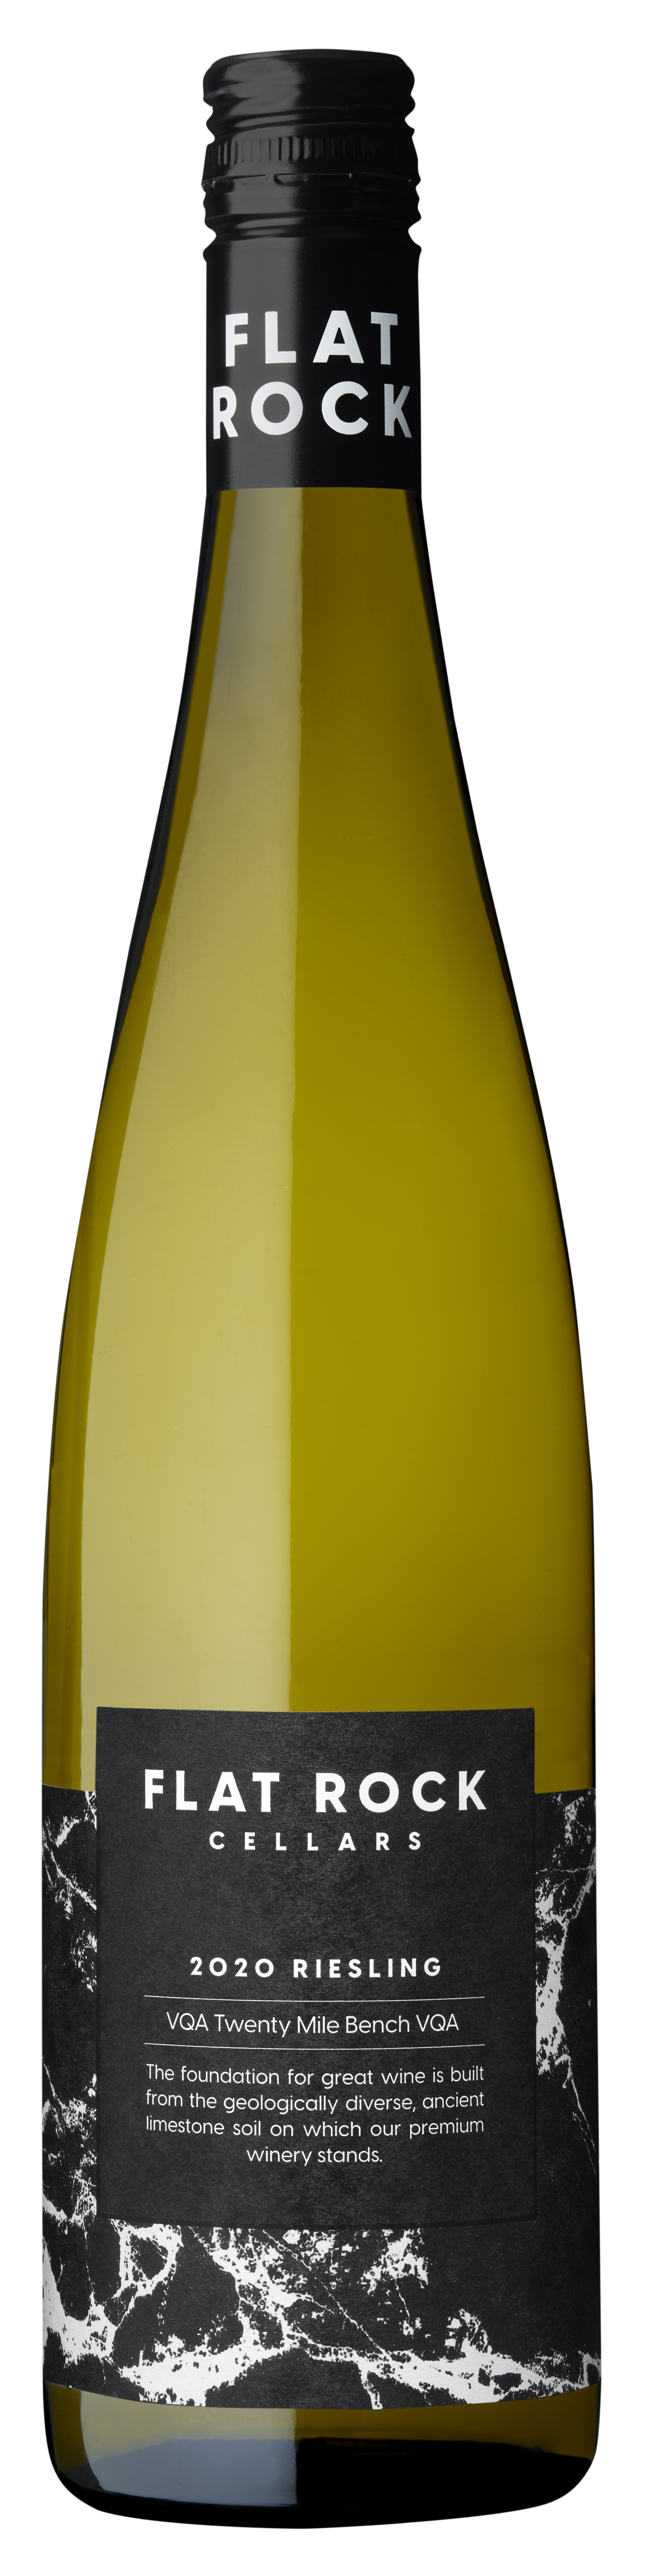 Product Image for 2020 Riesling